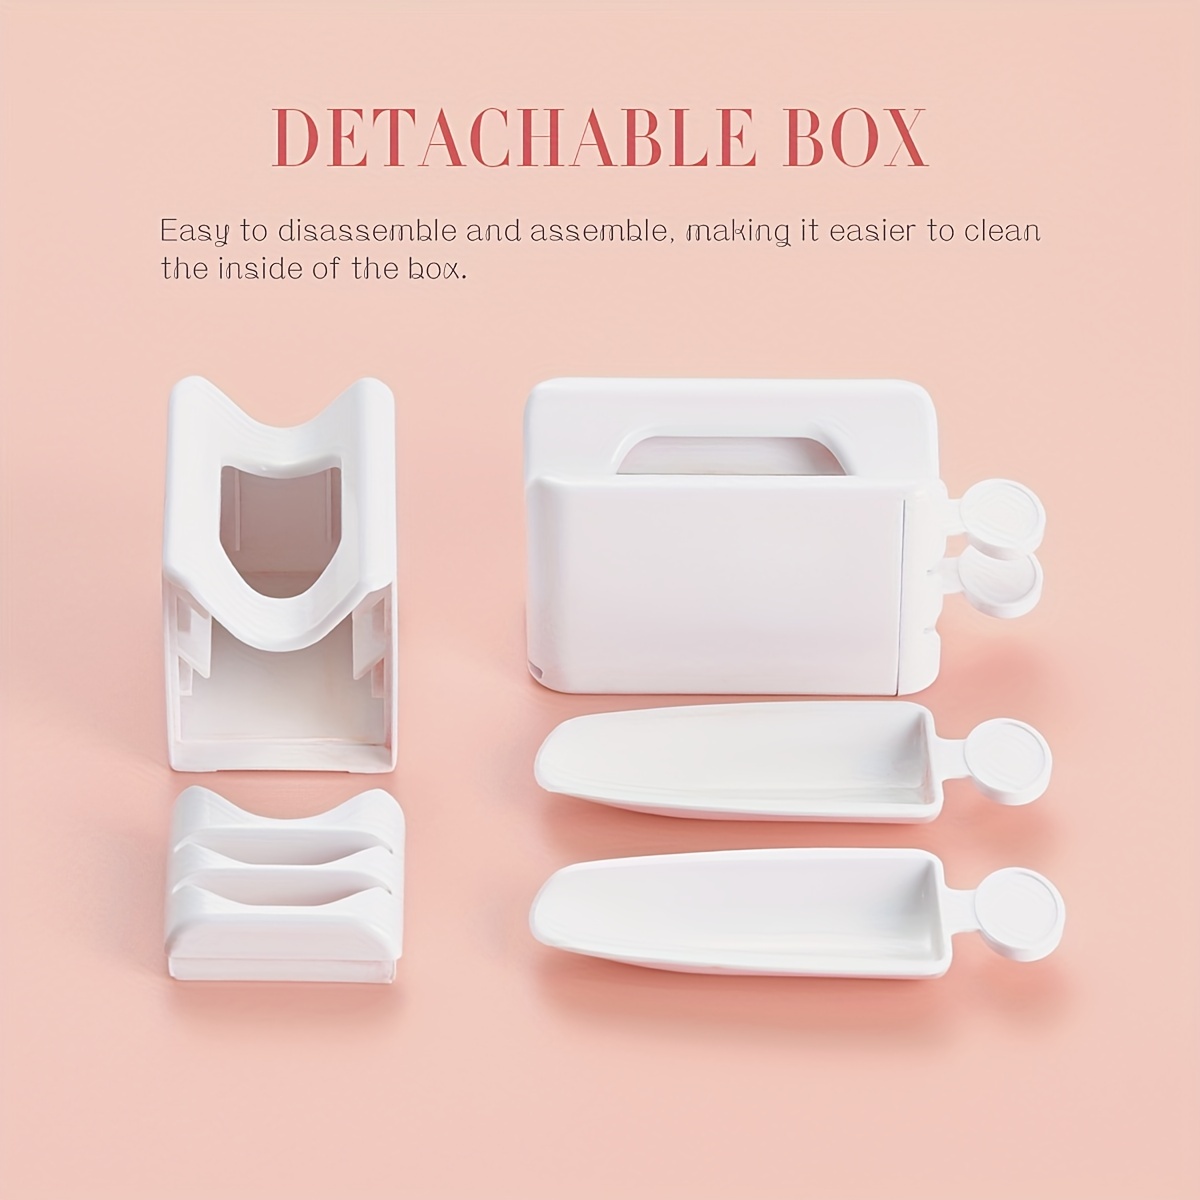 Tray System with Spoon, Nail Dip Container Portable Dip Powder Storage Box  with Soft Nail Dip Powder Brush, For Manicure and Makeup Tools Essential